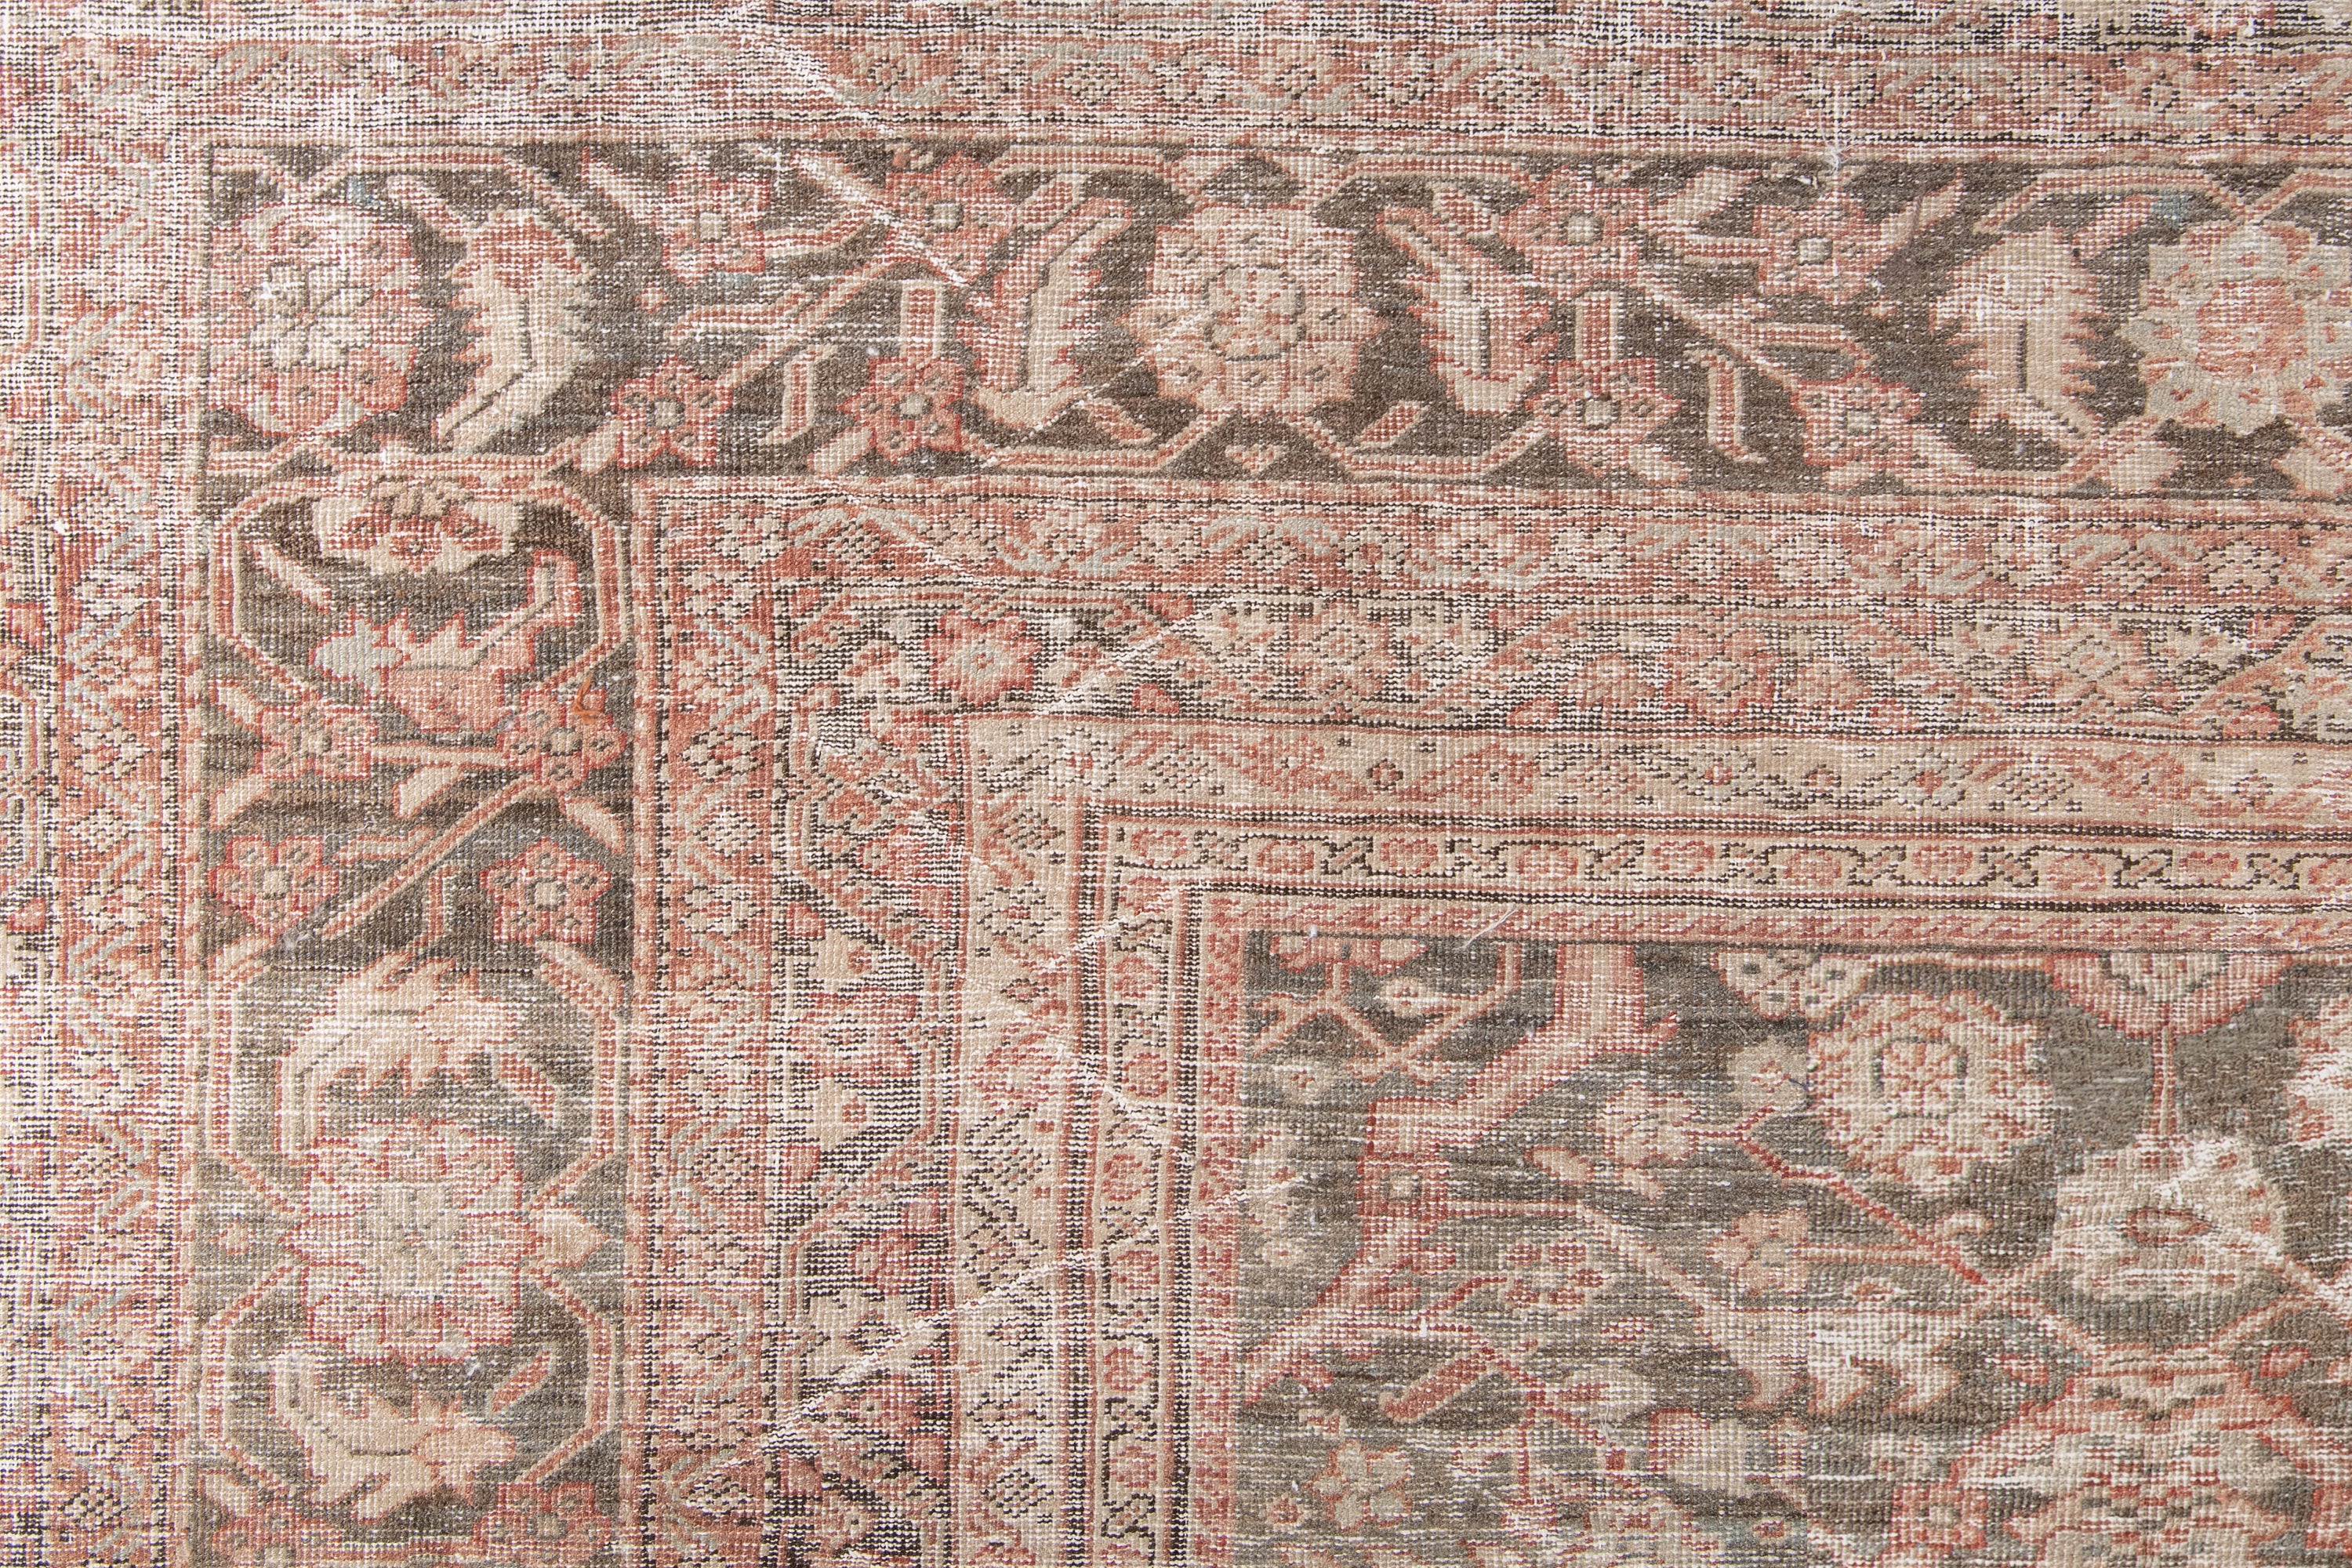 SULTANABAD RUG, AR31037, WEST PERSIA, 14' X 19' - thumbnail 3